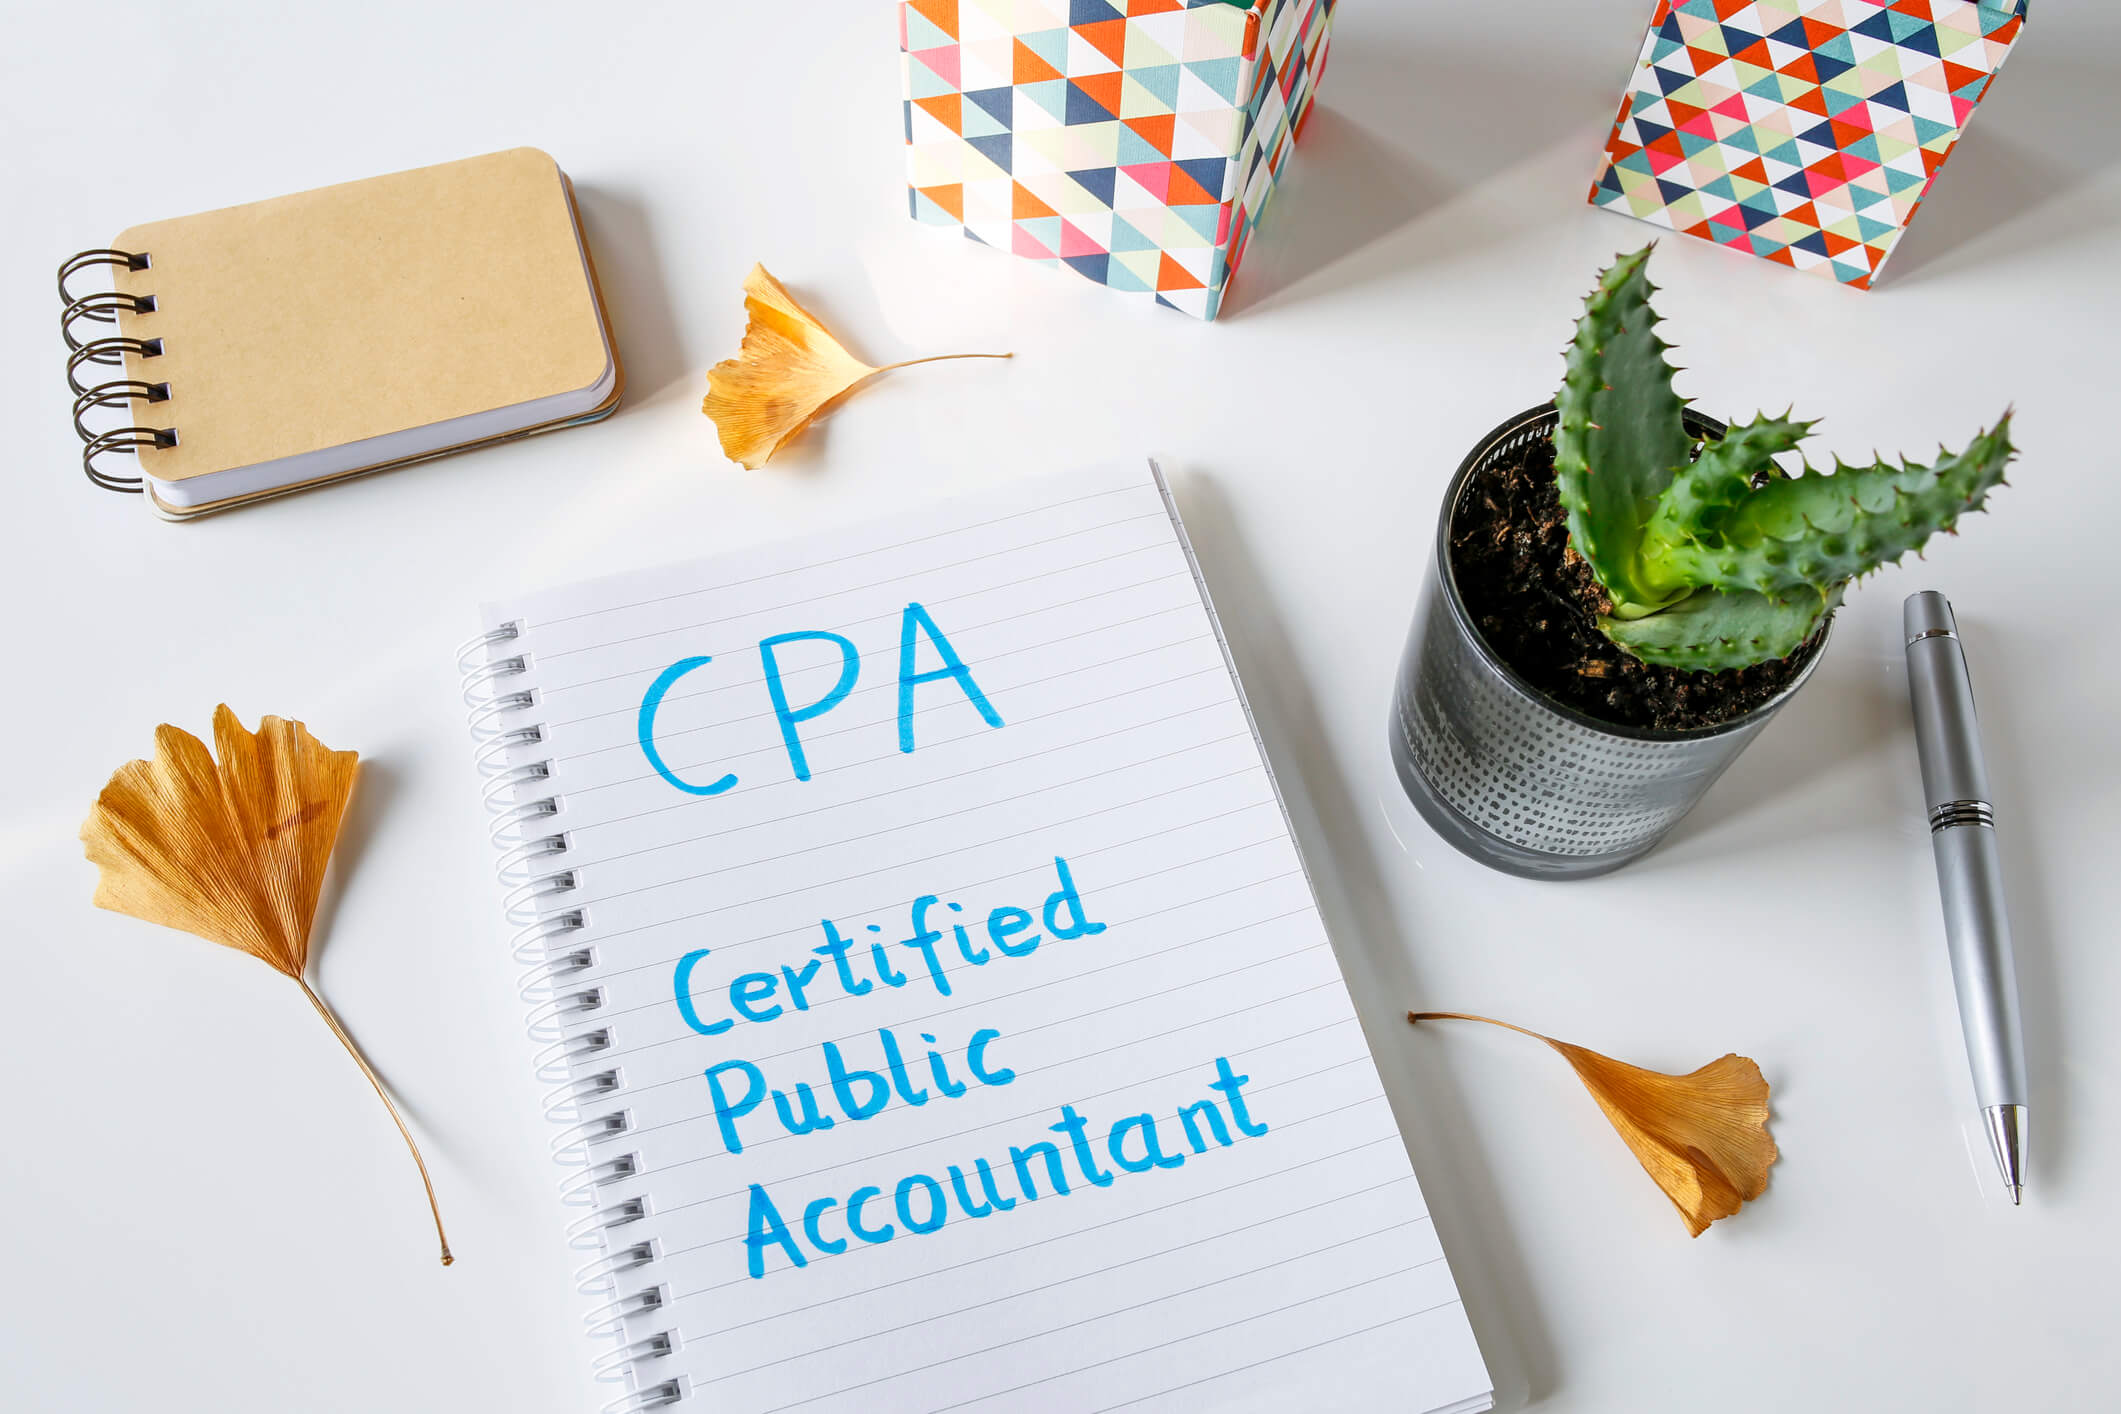 CPA Certified Public Accountant written in notebook on white table